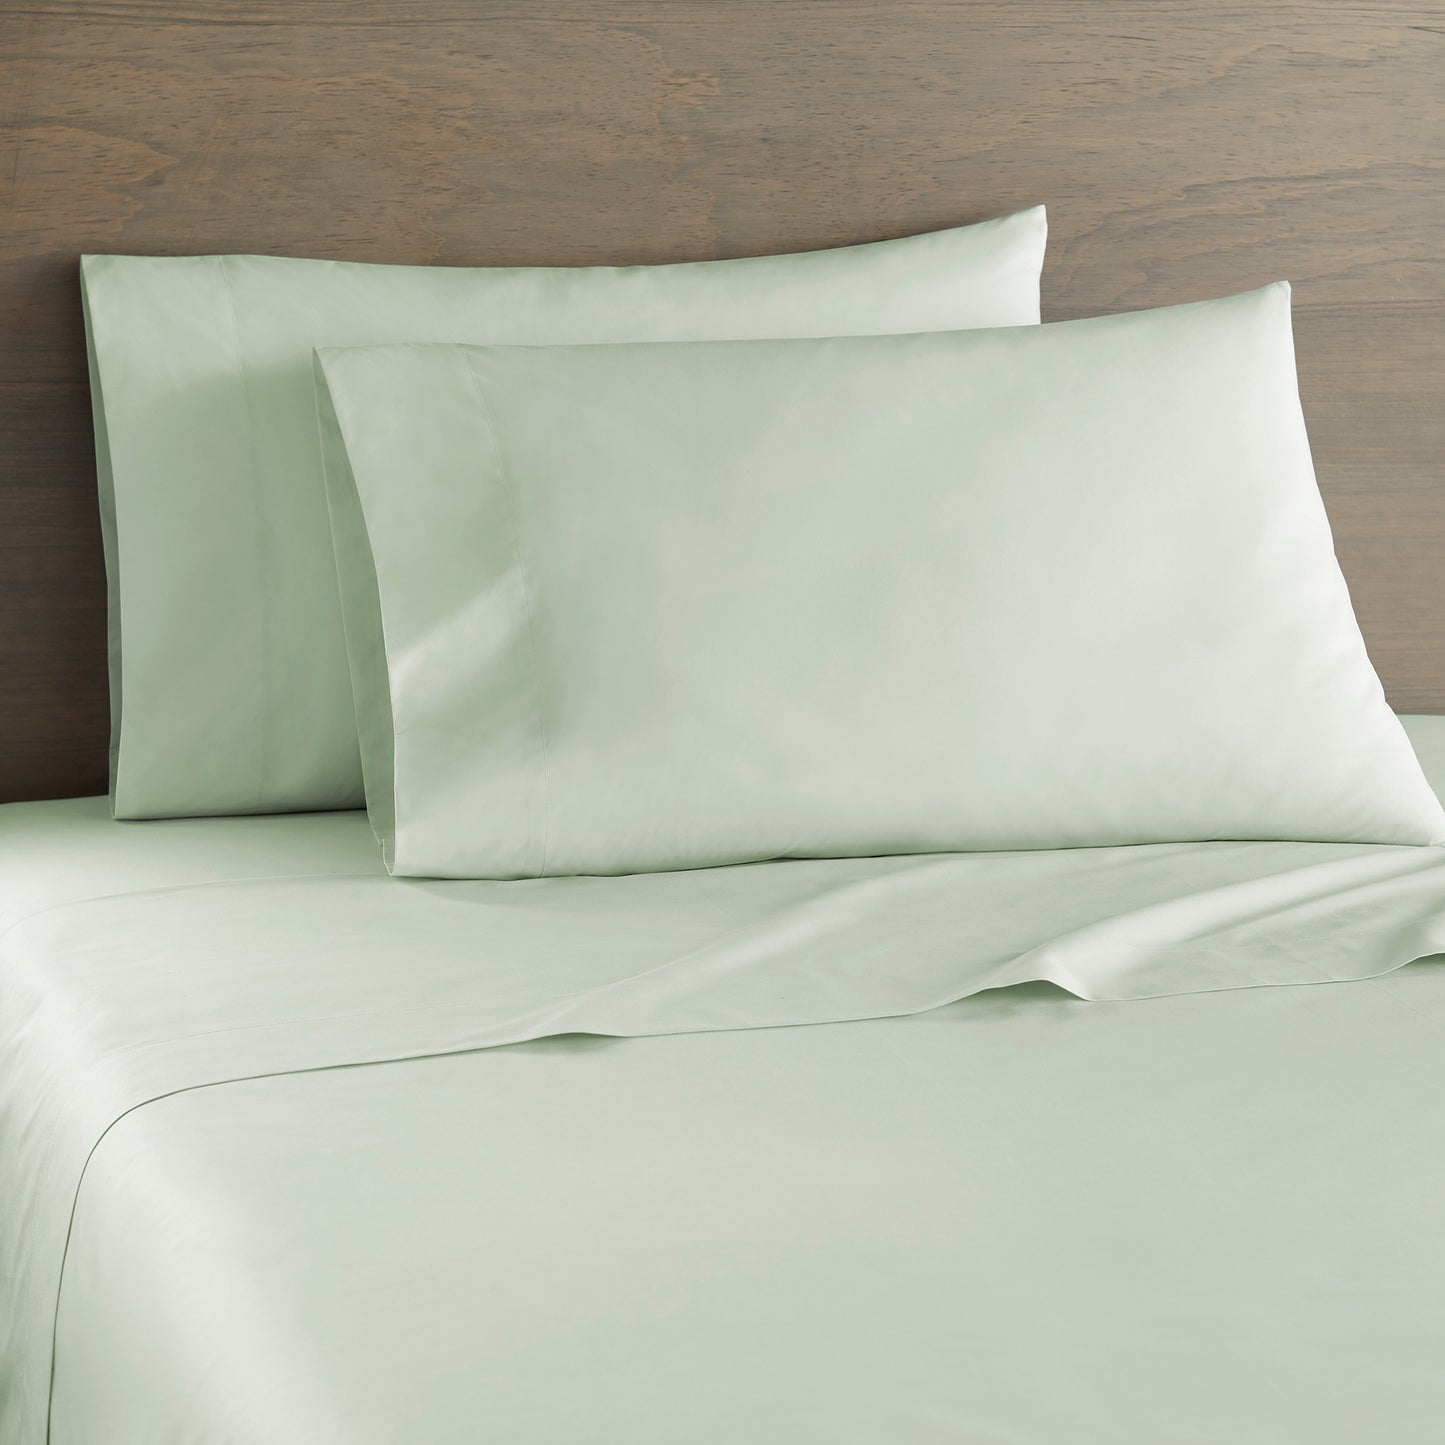 Cotton Percale 250 Thread Count Percale Sheet Set